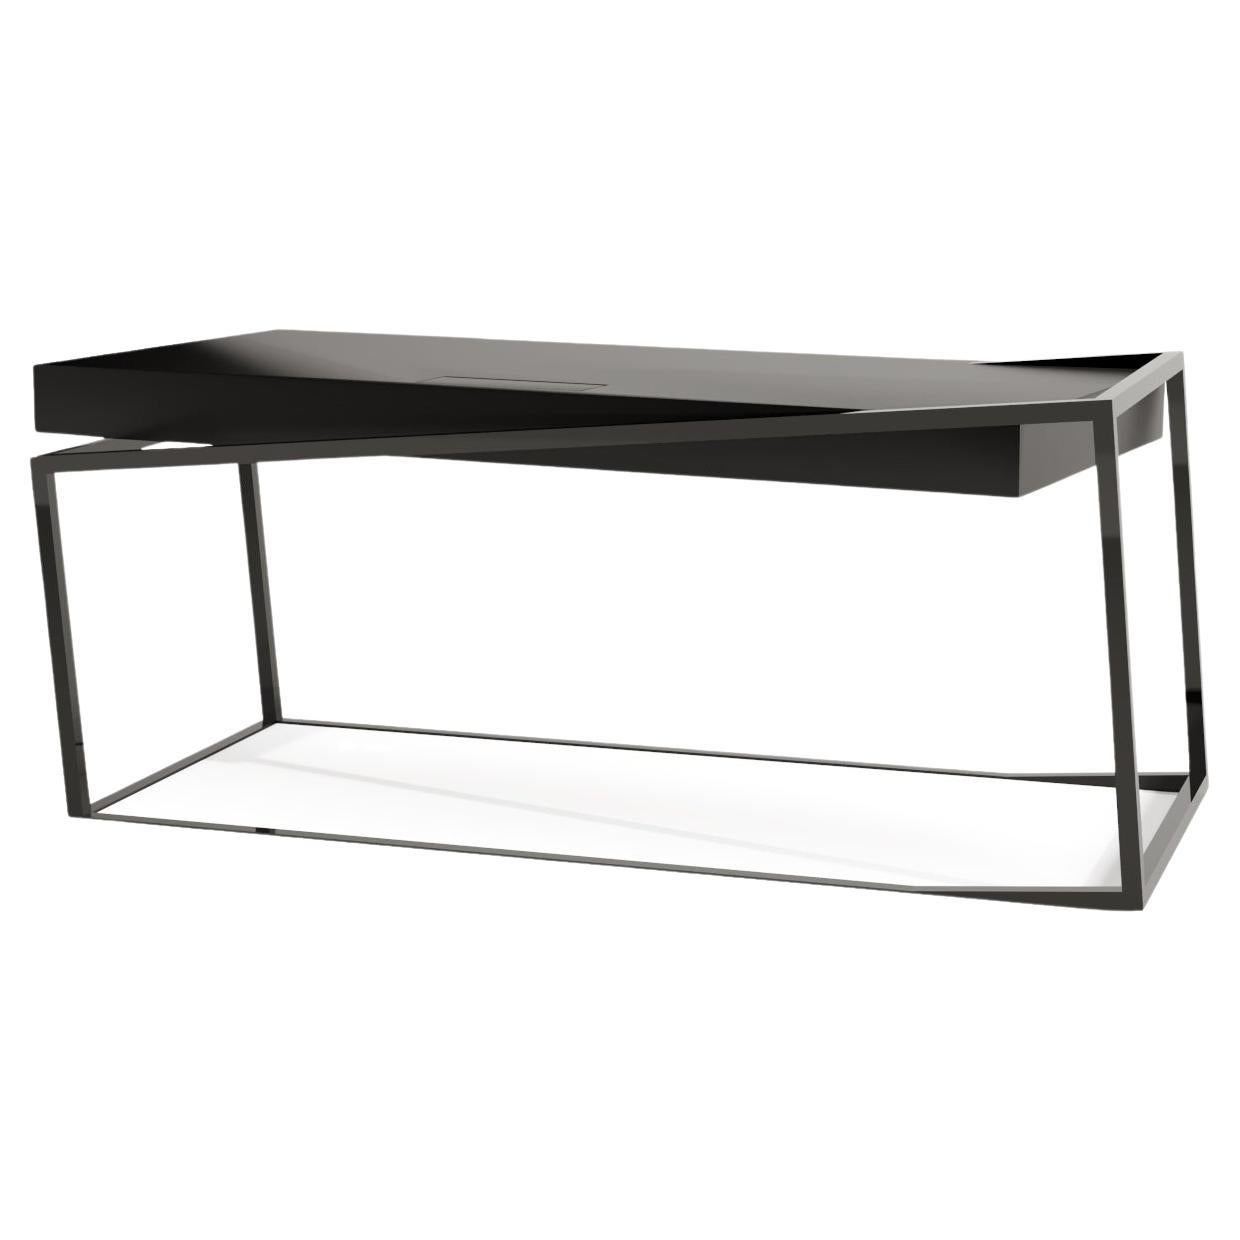 Modern Home Office Writing Executive Desk Black Oak Wood Black Lacquered Steel For Sale